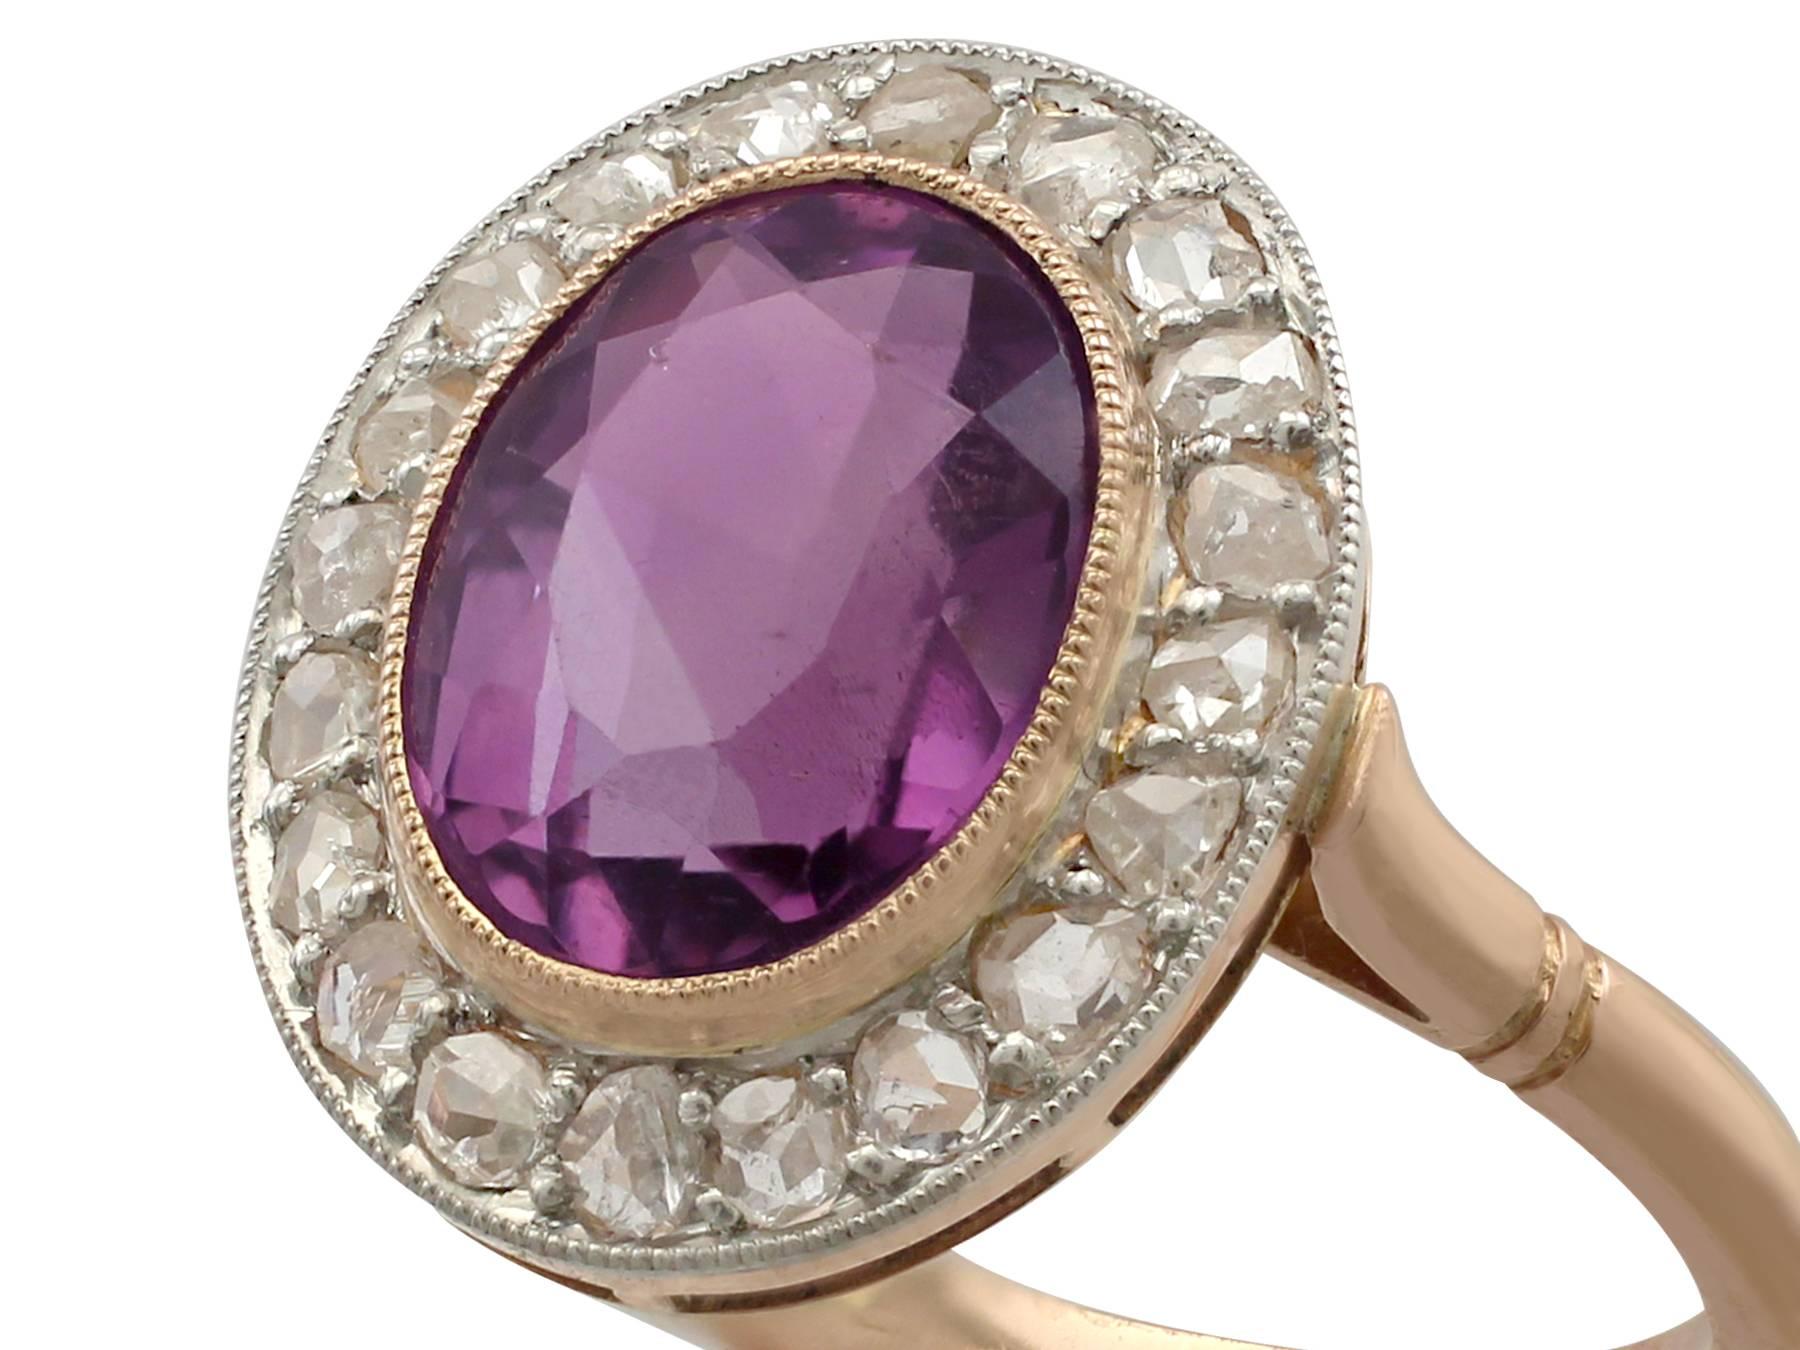 Retro 1940s 2.65 Carat Amethyst and Diamond Rose Gold Cocktail Ring